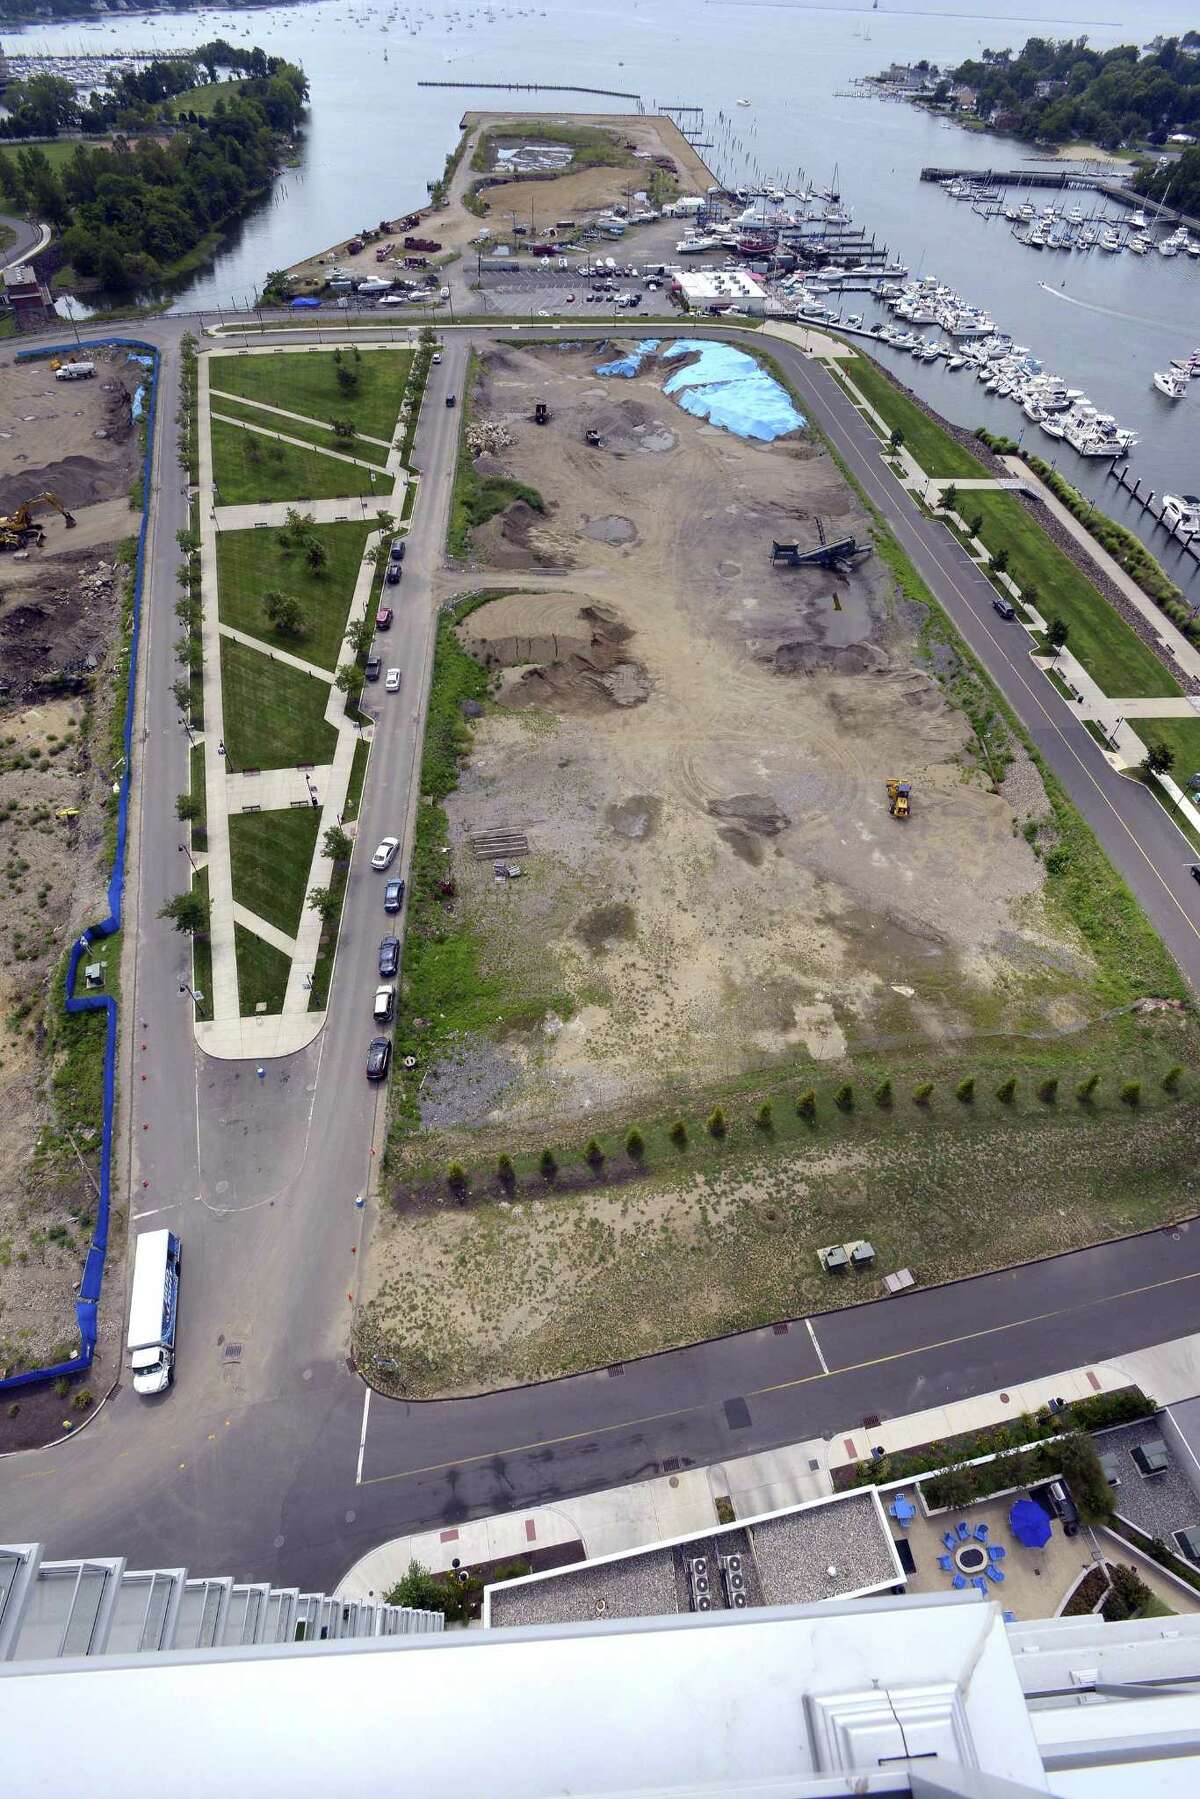 South End developer Building and Land Technology won the right to redevelop a 14-acre parcel of land, shown at the top of this photo taken on Friday, Aug. 19, 2016 from the observation deck of The Beacon, in Stamford, Connecticut. The land once housed Stamford?’s last working boatyard.